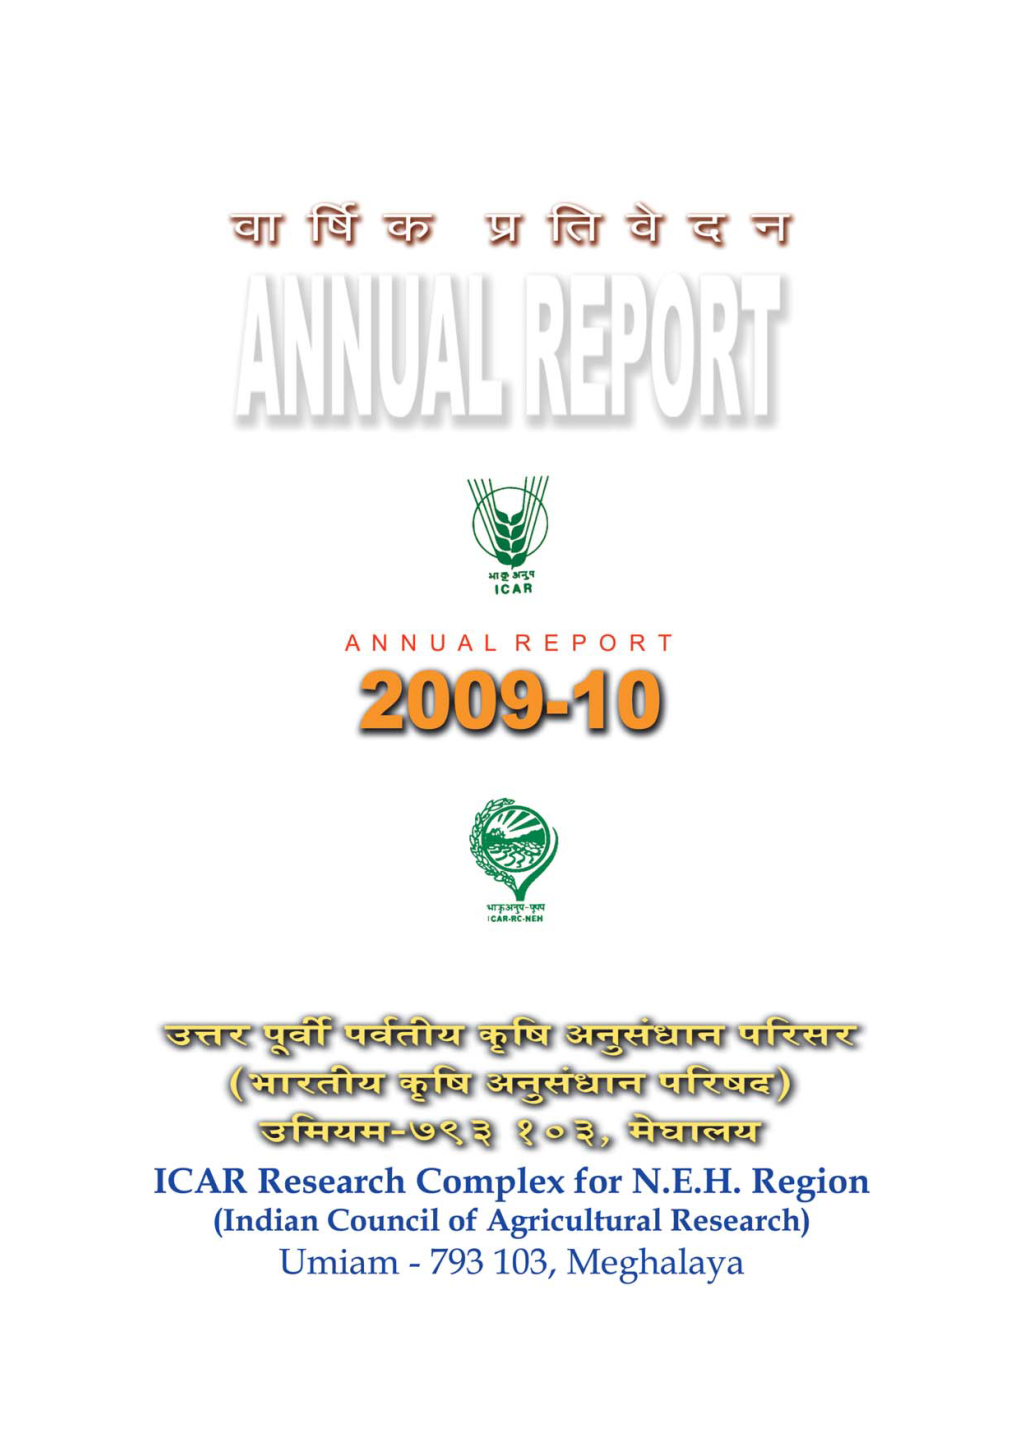 Annual Report 2009-10 of ICAR Research Complex for NEH Region